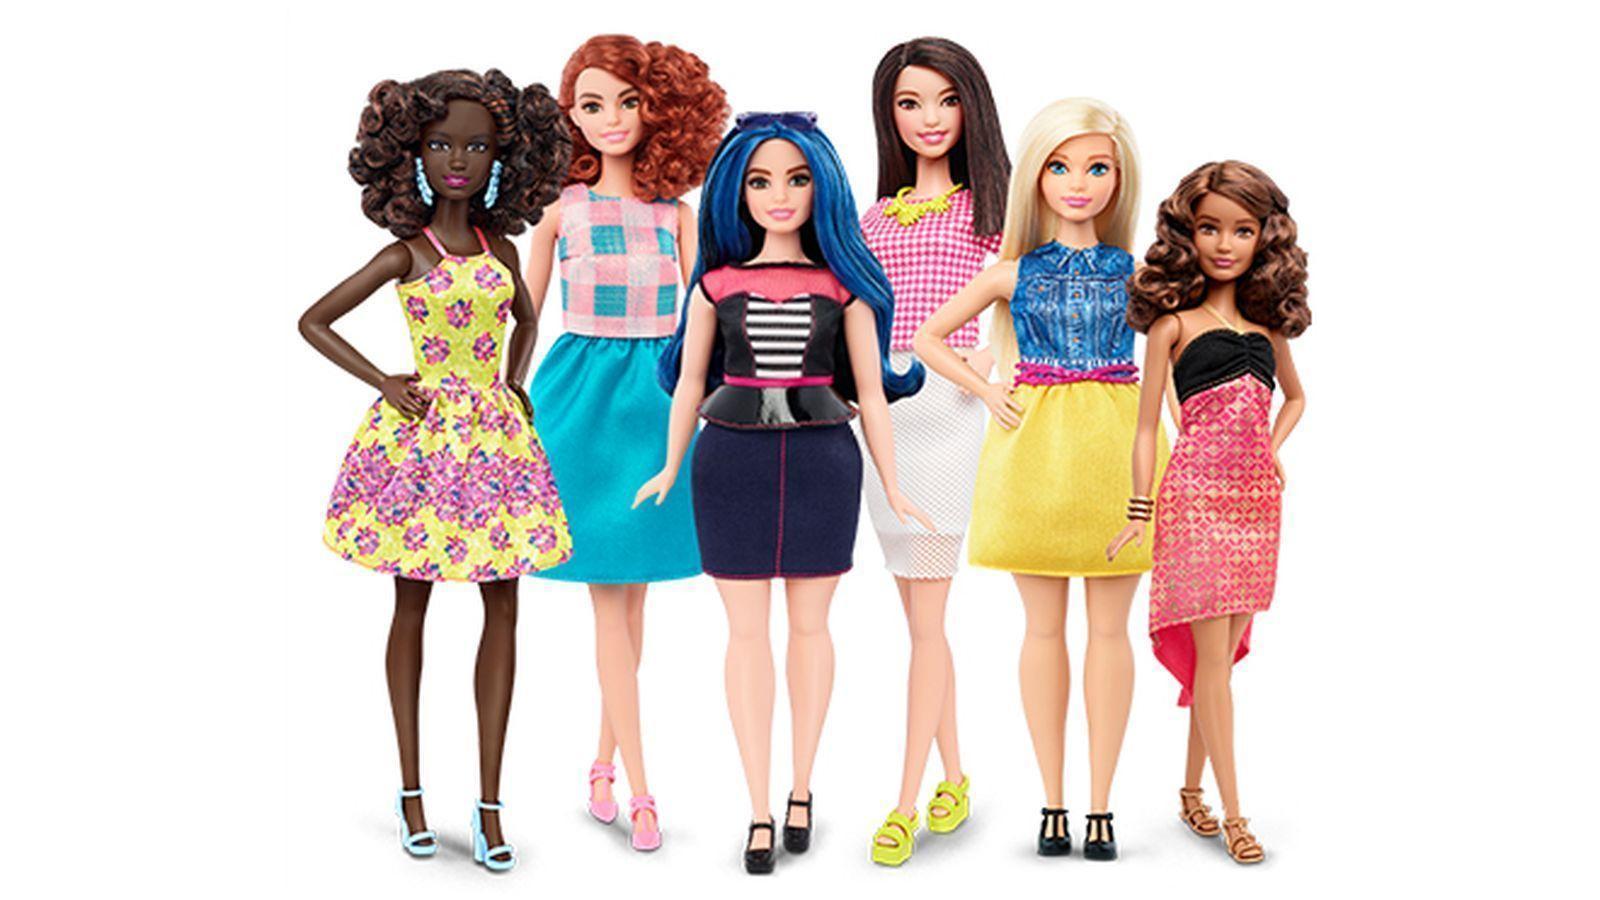 Barbie is now available in tall, curvy, and petite sizes